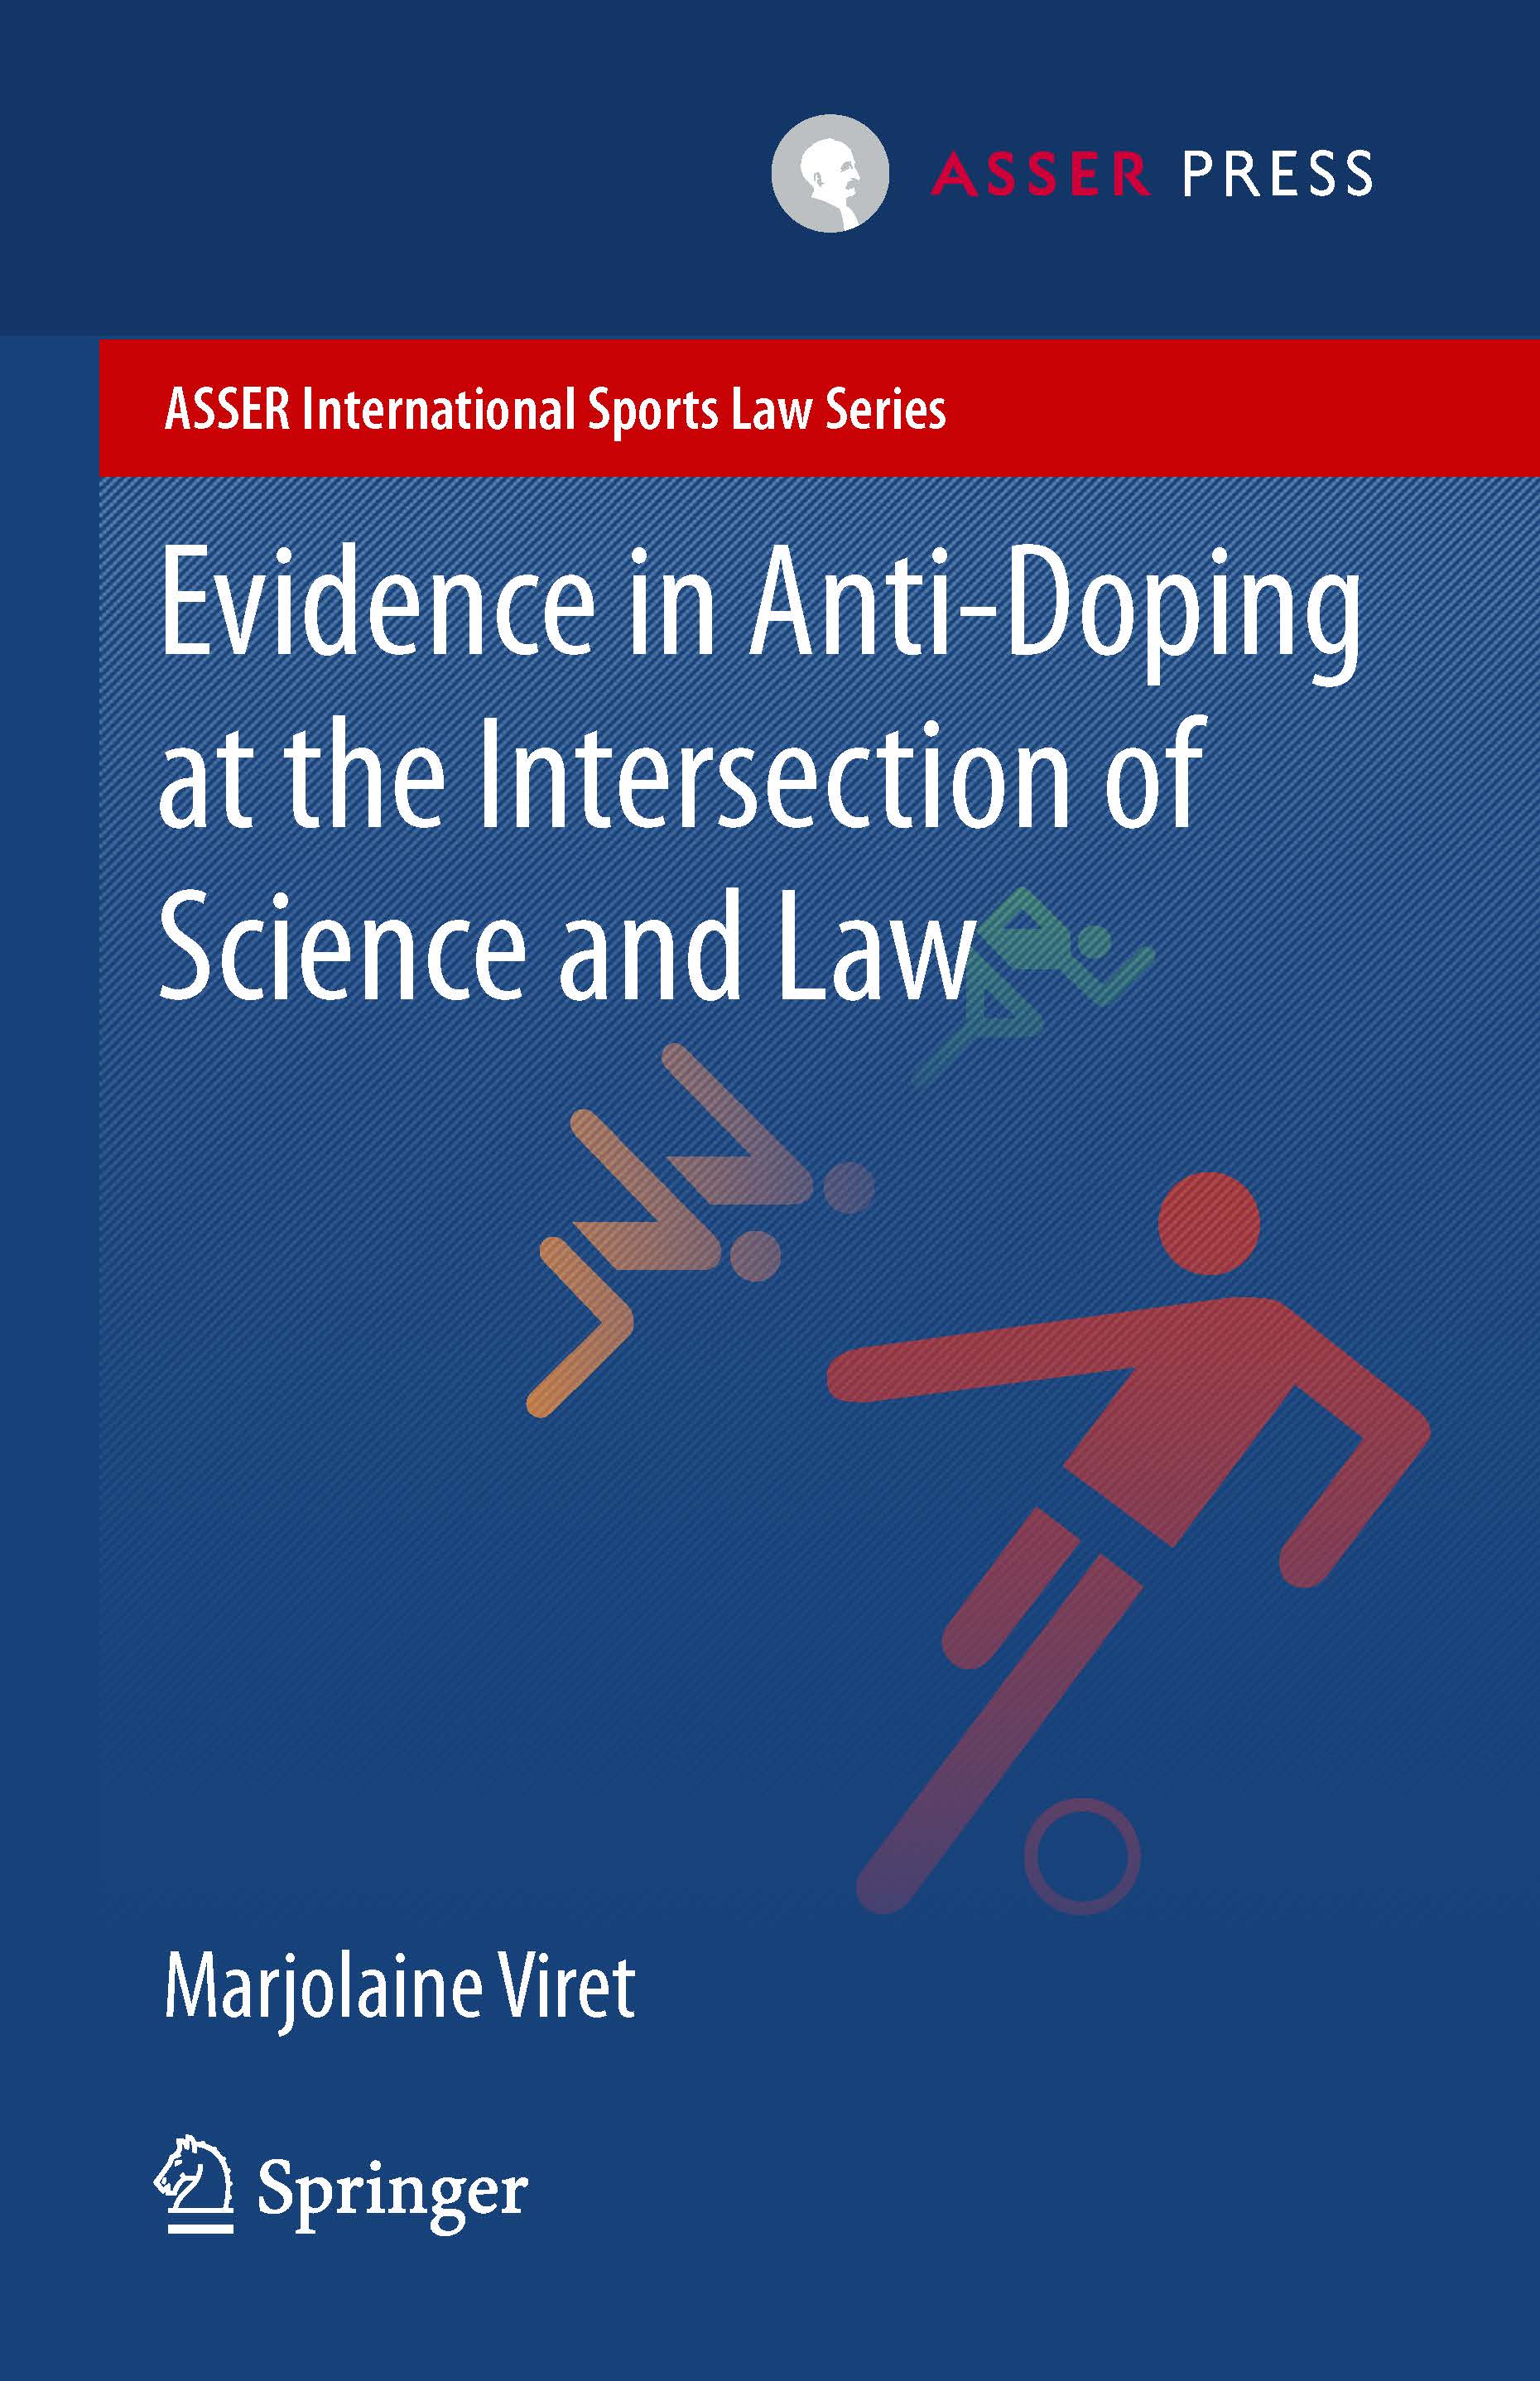 Evidence in Anti-Doping at the Intersection of Science and Law